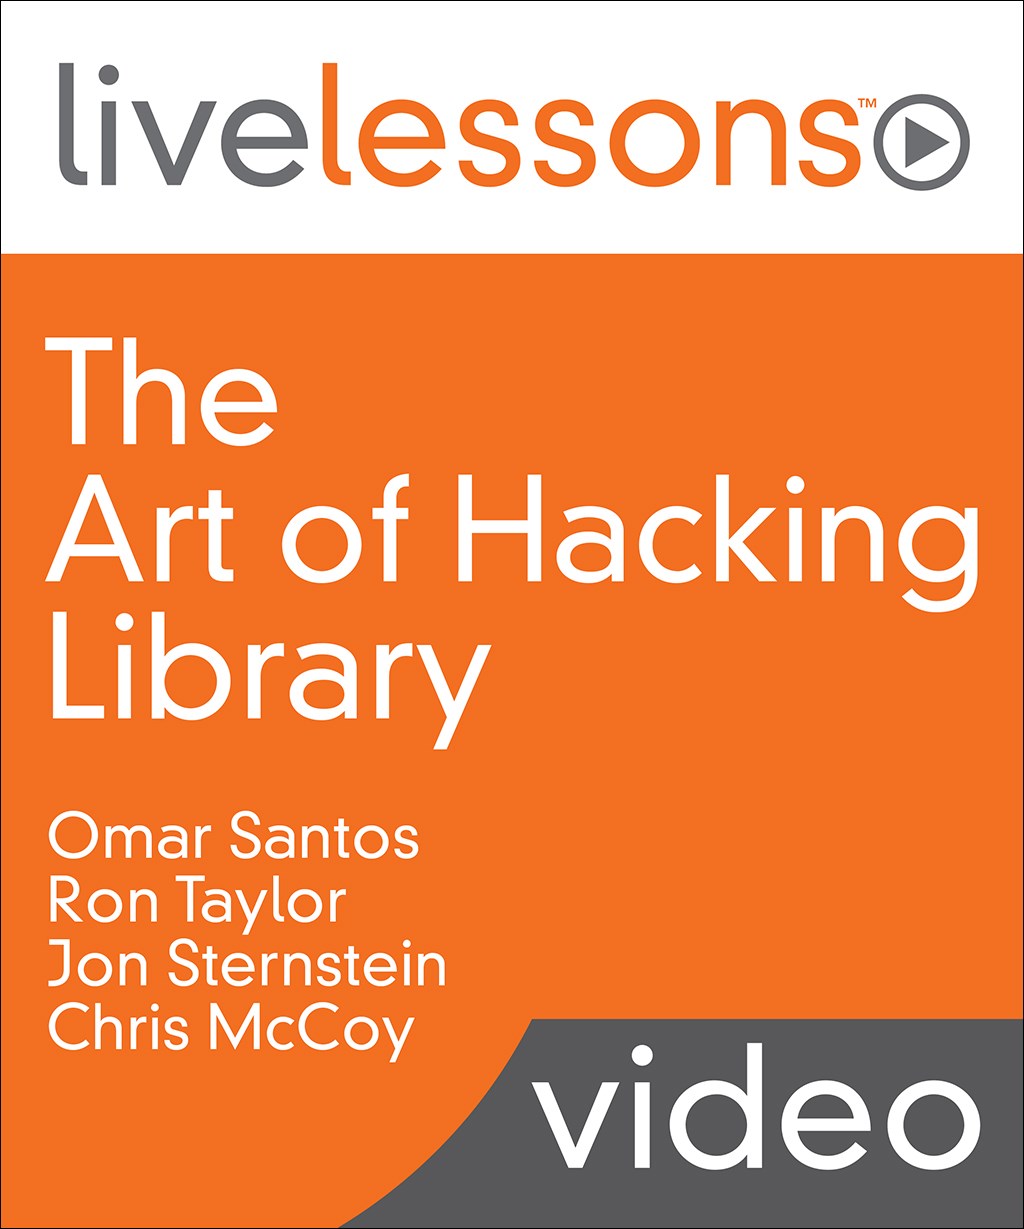 The Art of Hacking Library (Video Training)